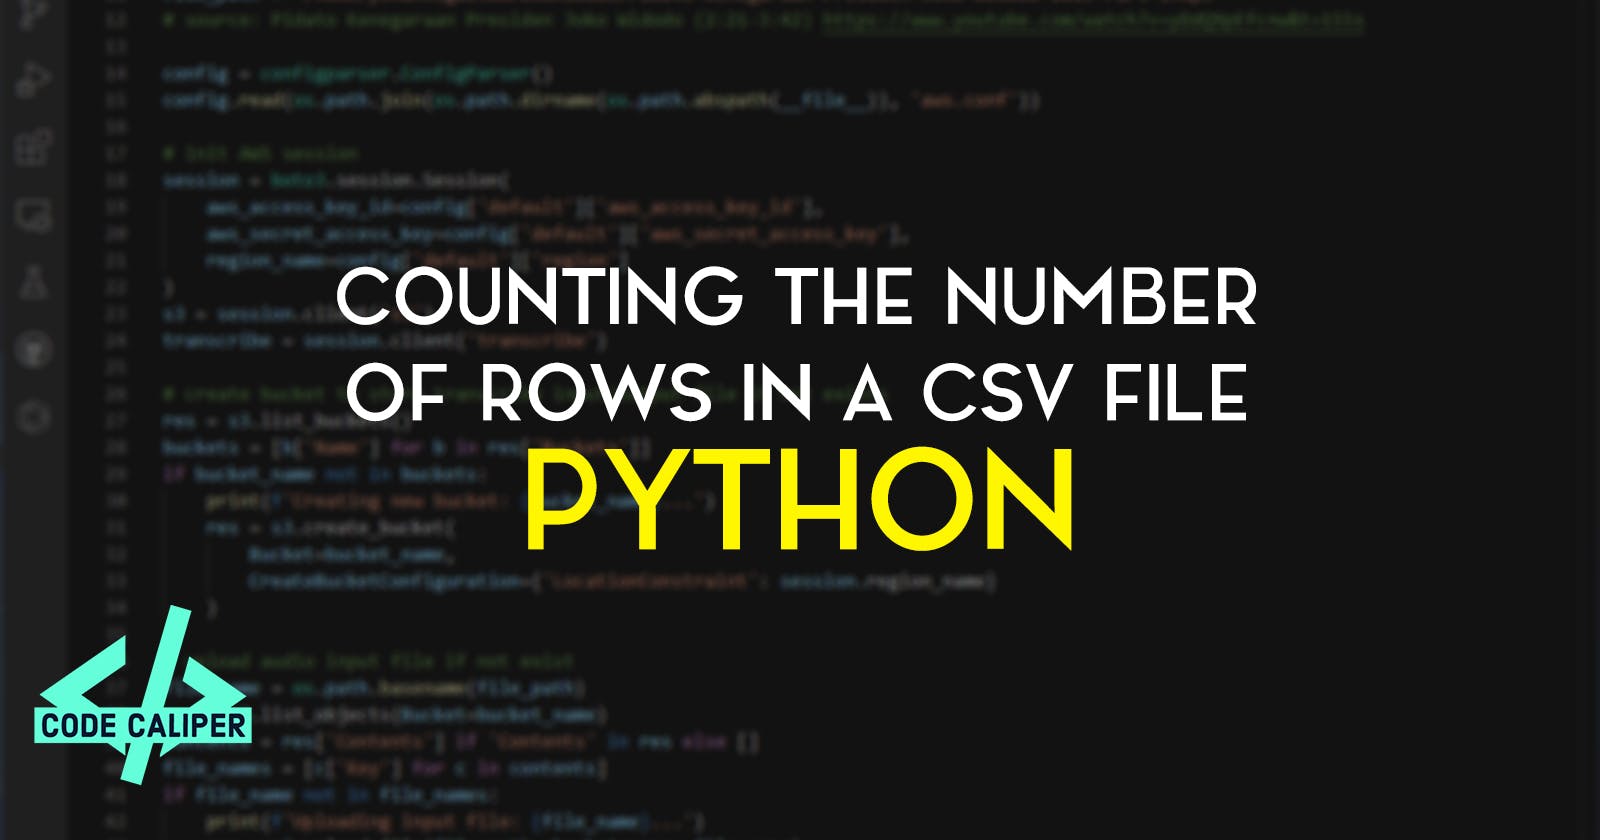 Counting the Number of Rows in a CSV File with Python